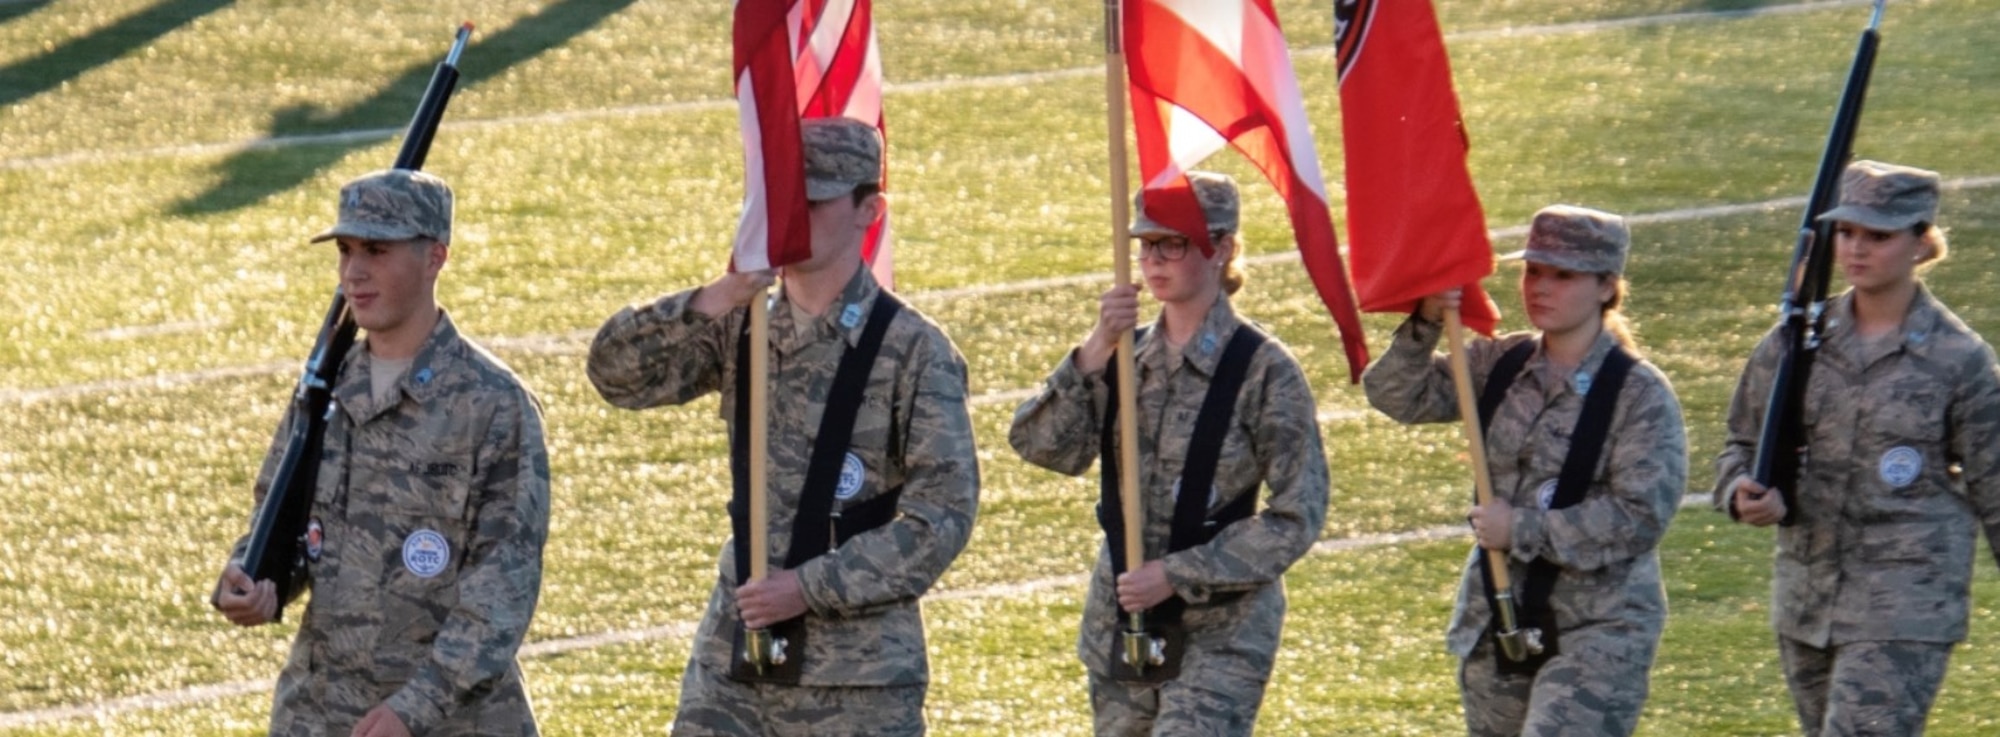 Aaron Staiger (front) leads the Air Force Junior ROTC Honor Guard as it presents the colors before Beavercreek High School’s home football game Sept. 10. Staiger is a cadet lieutenant colonel and deputy commander in the JROTC unit. (Contributed photo)